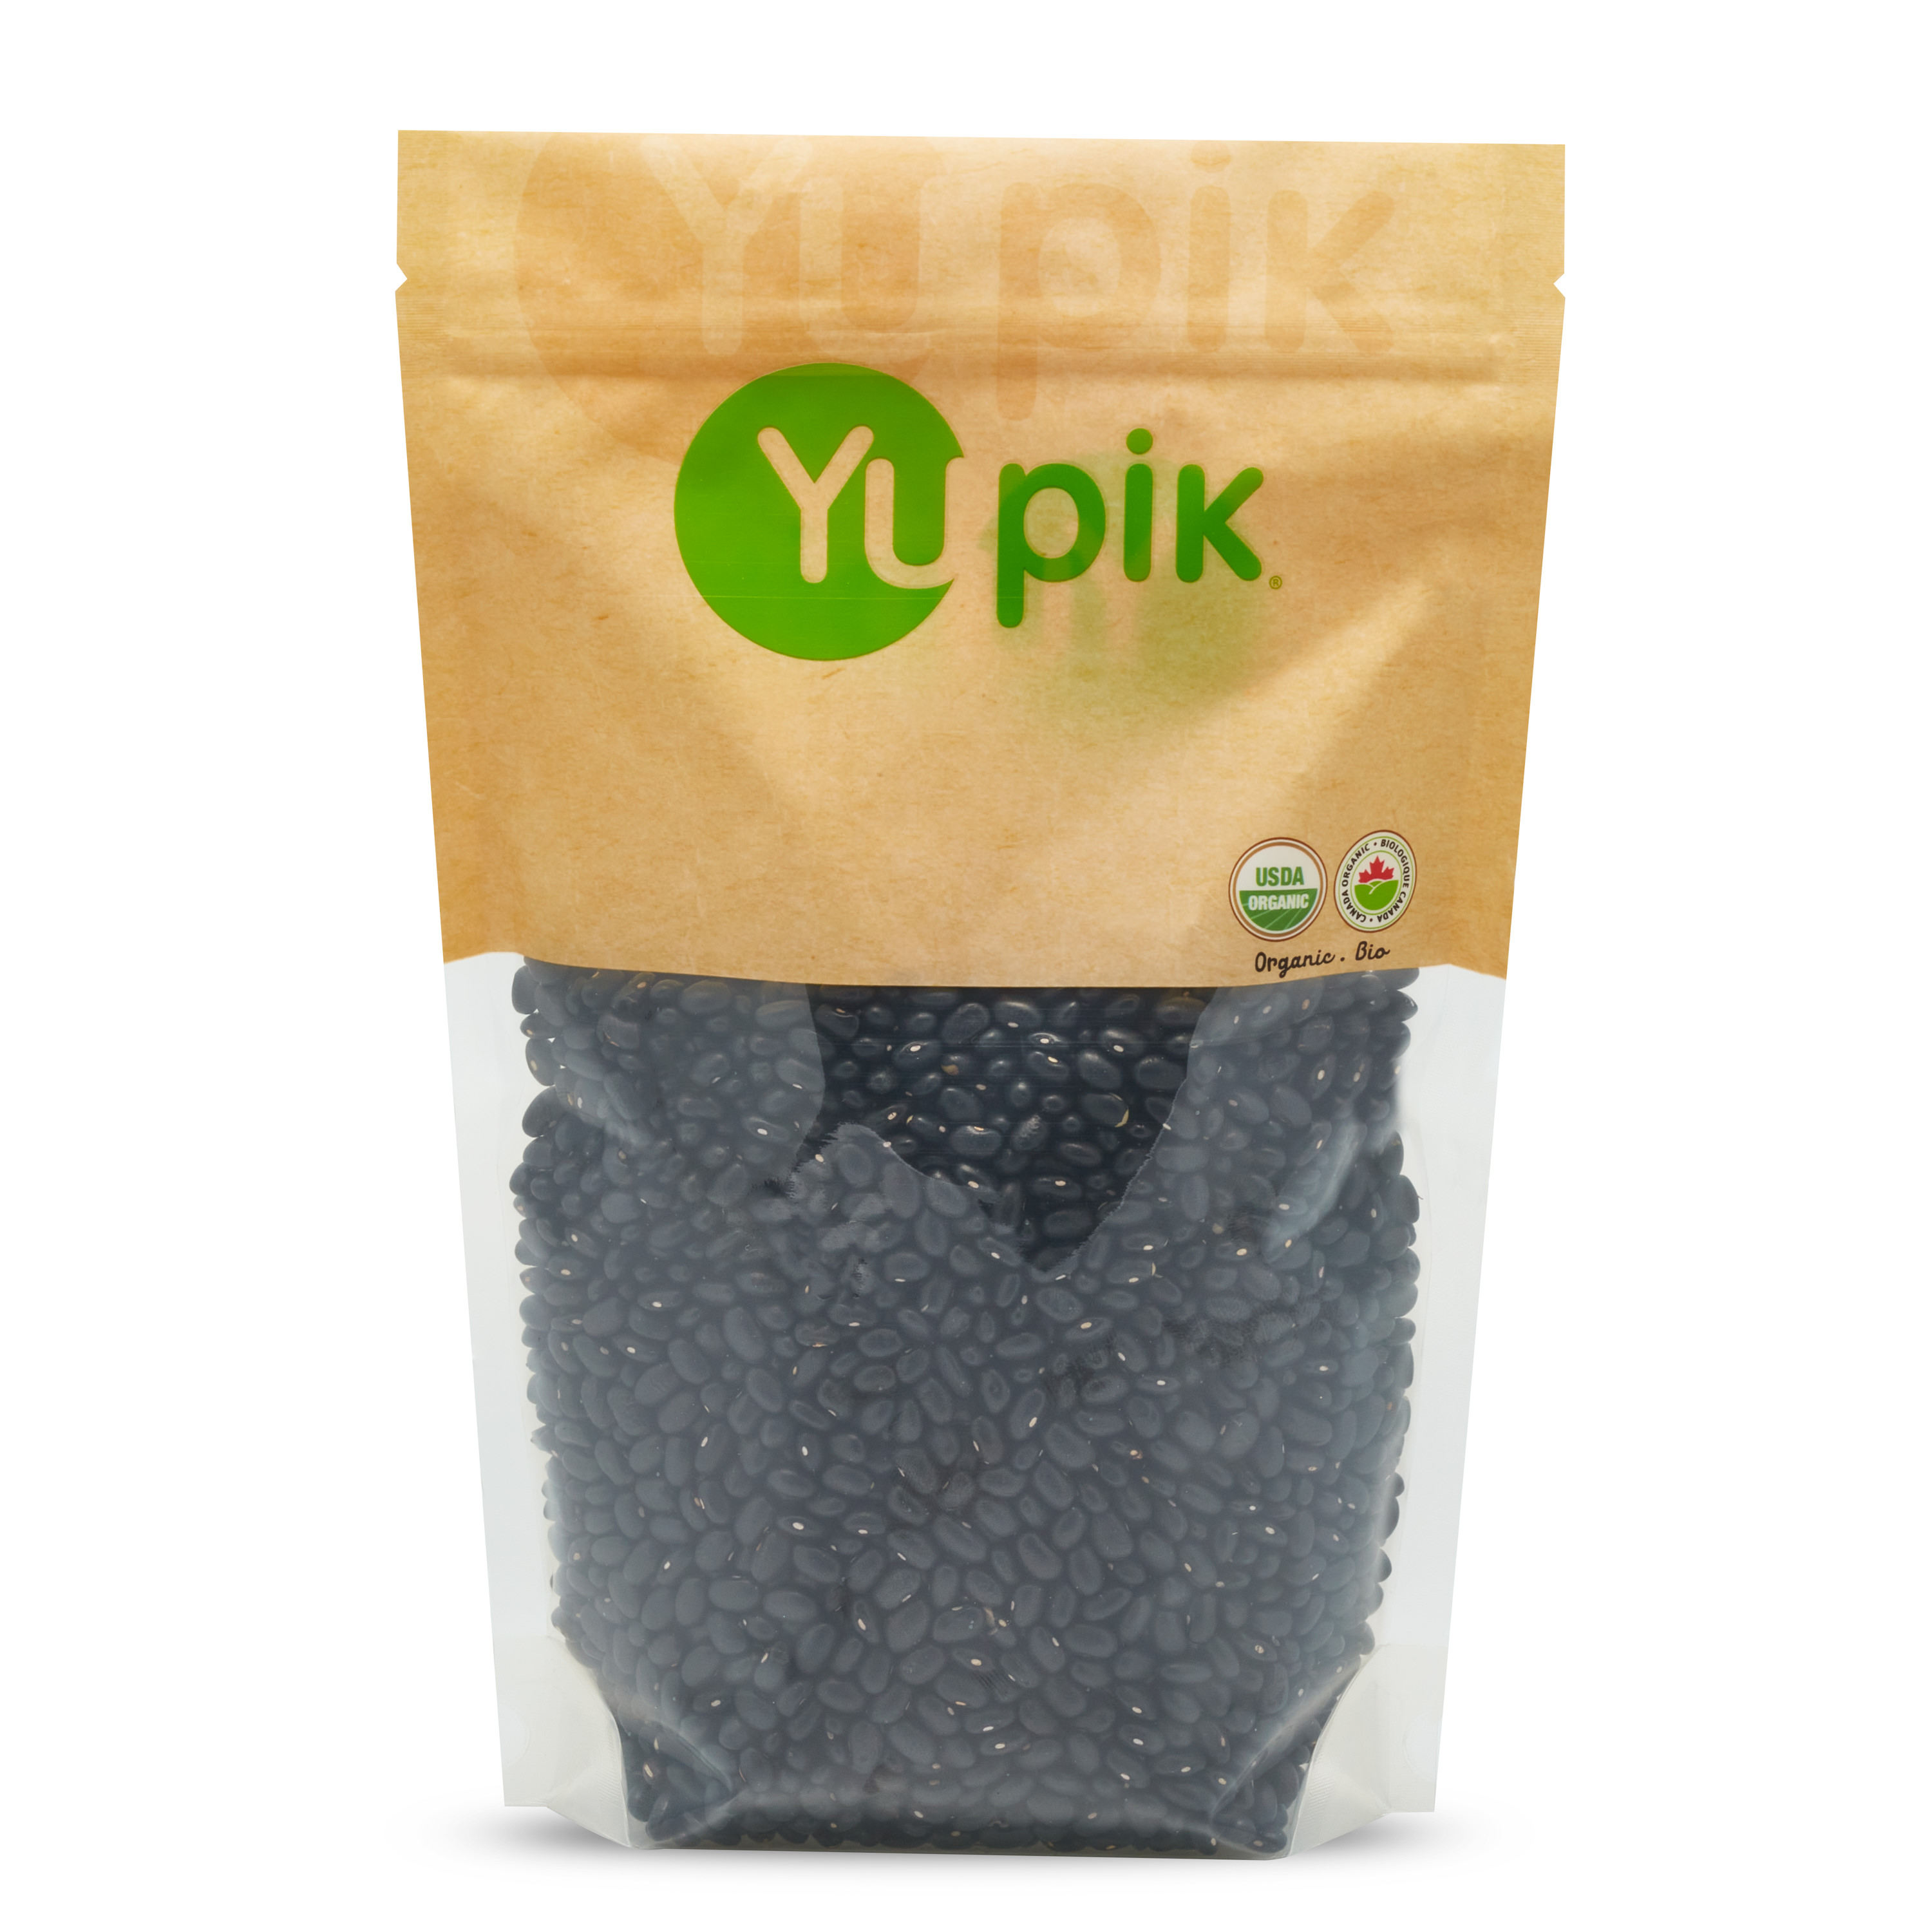 Organic black turtle beans.It is a raw agriculture product. Although it has been mechanically cleaned before packaging, some foreign material may be present. Sort and wash before using.